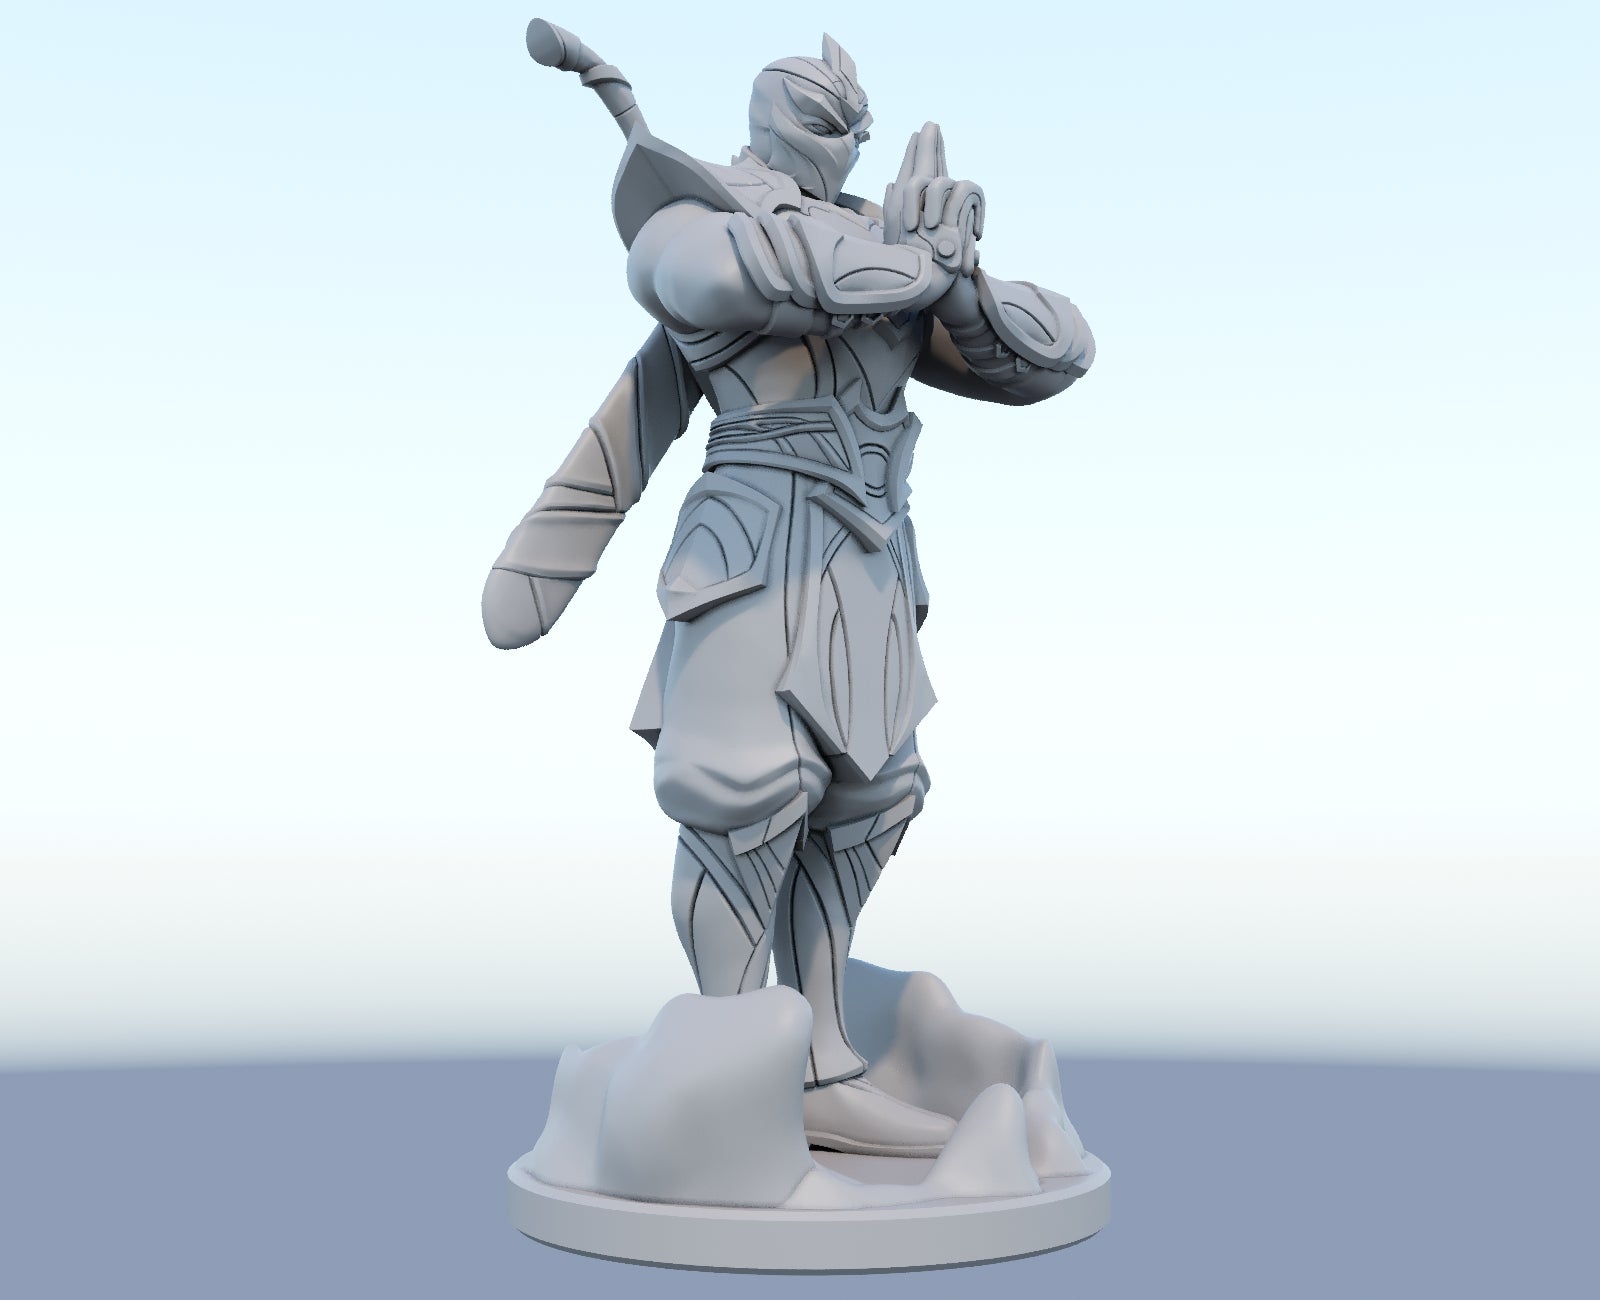 Shen 3D-printed League of Legends champion figure. Decorate your gaming setup or home with your favorite League of Legends champion! Choose between the unpainted version, perfect for you to paint yourself, or the hand-painted version by a professional painter. Order your figure today!